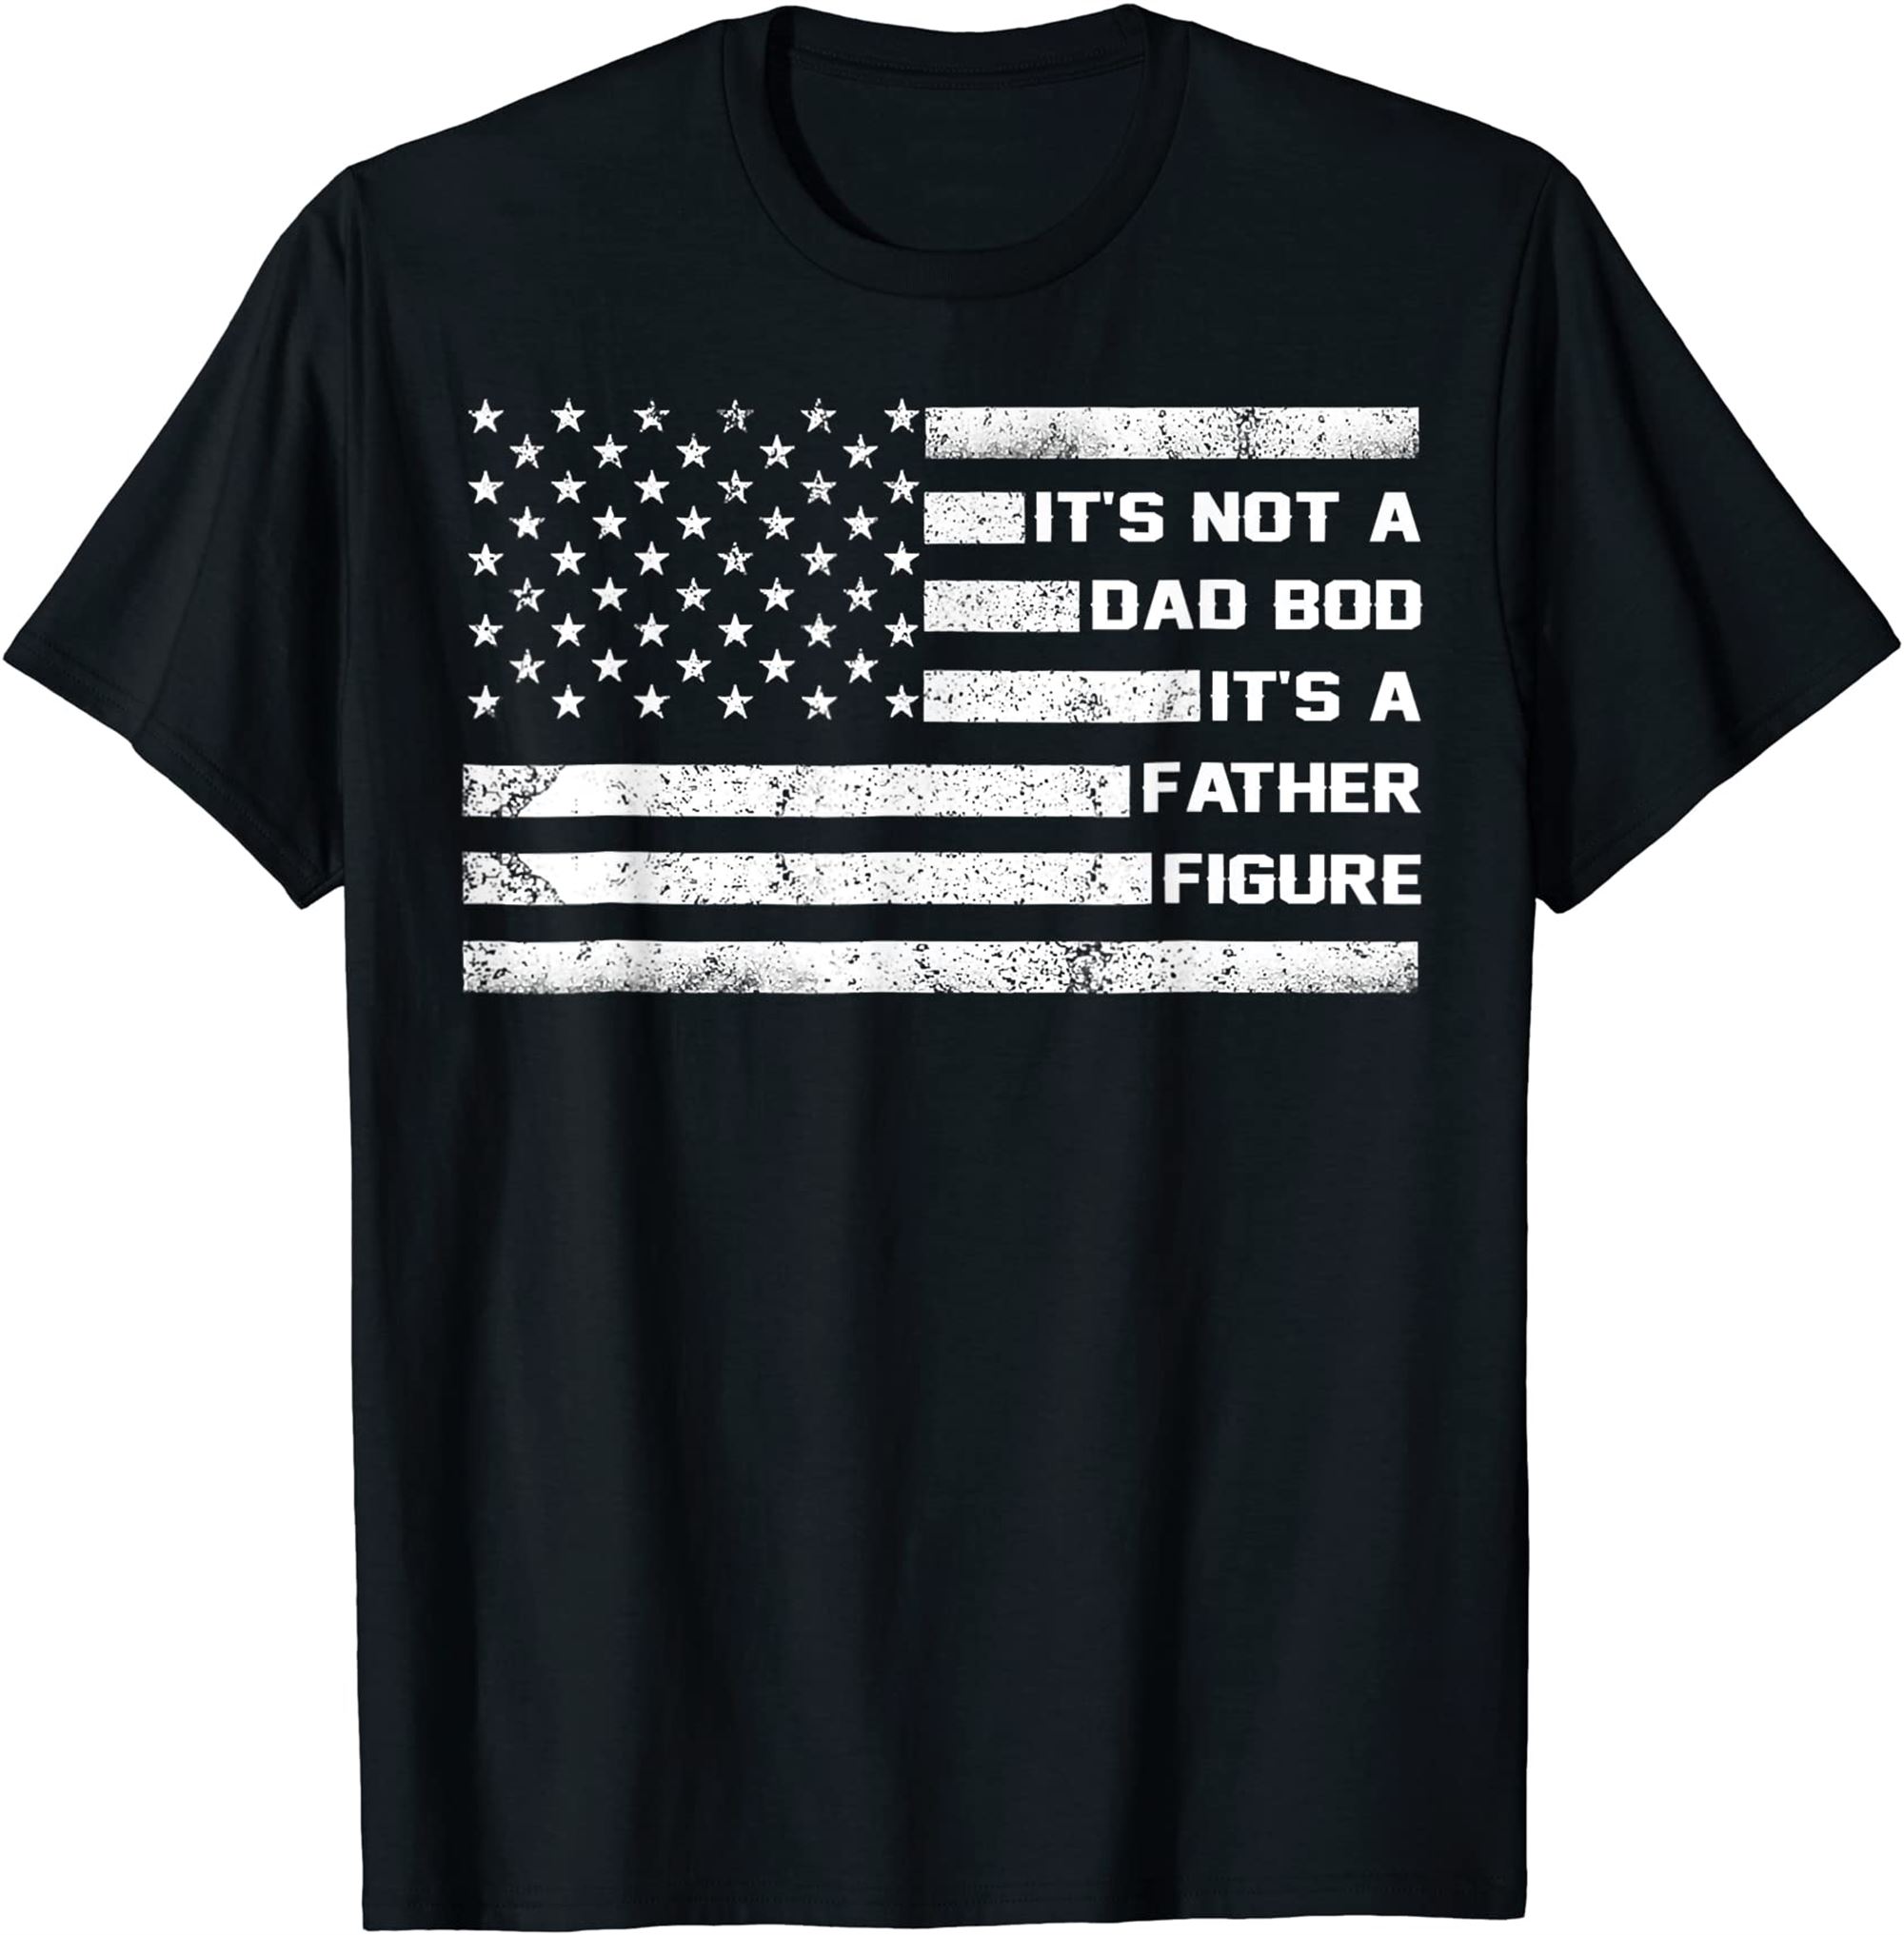 Its Not A Dad Bod Its A Father Figure American Flag T-shirt Size Up To 5xl